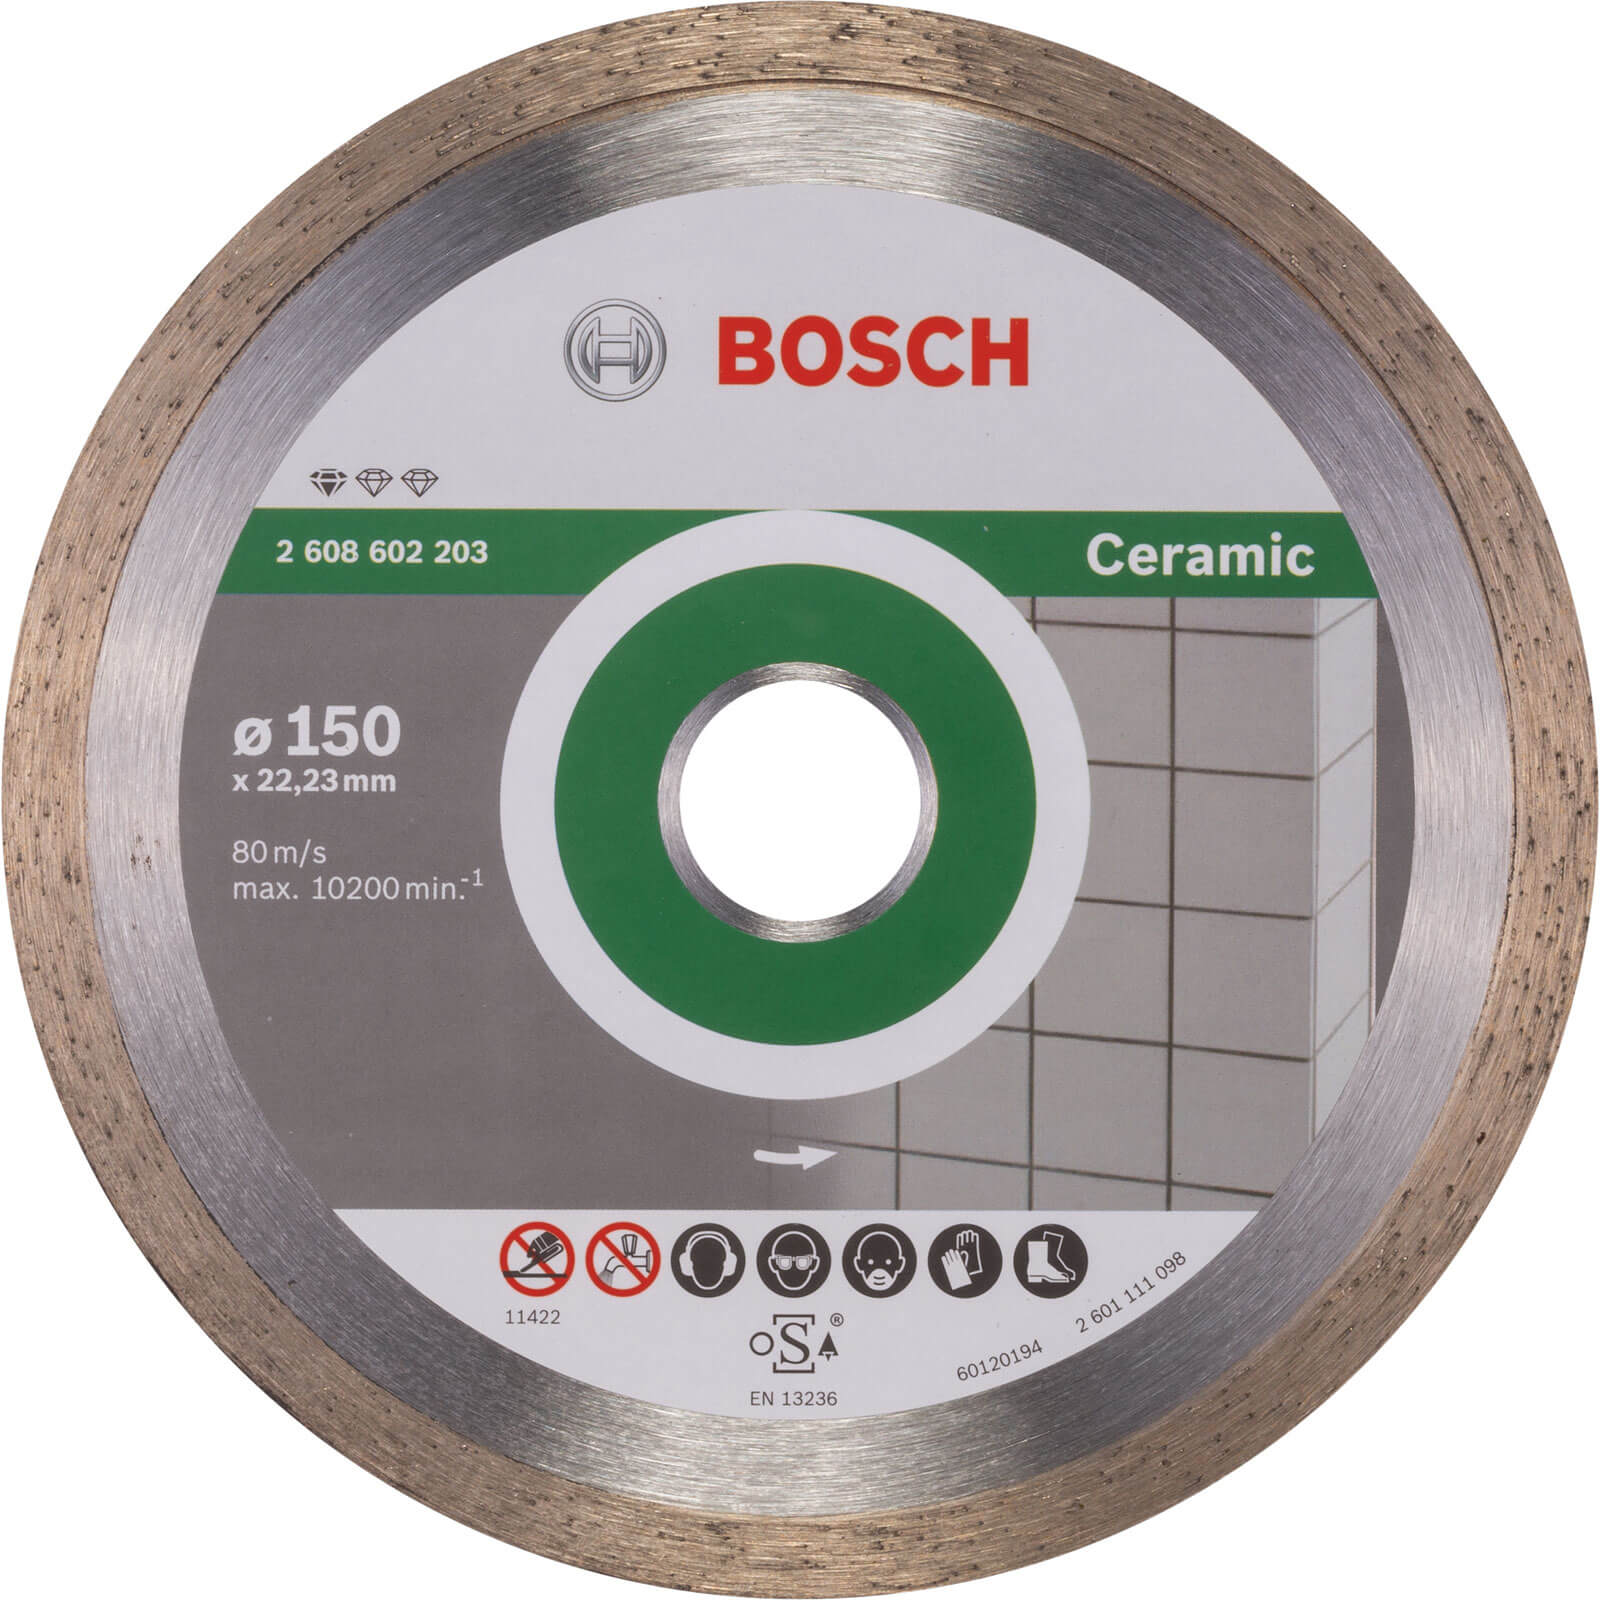 Photos - Cutting Disc Bosch Diamond  for Ceramic , Porcelain and Stone 150mm 2608602 